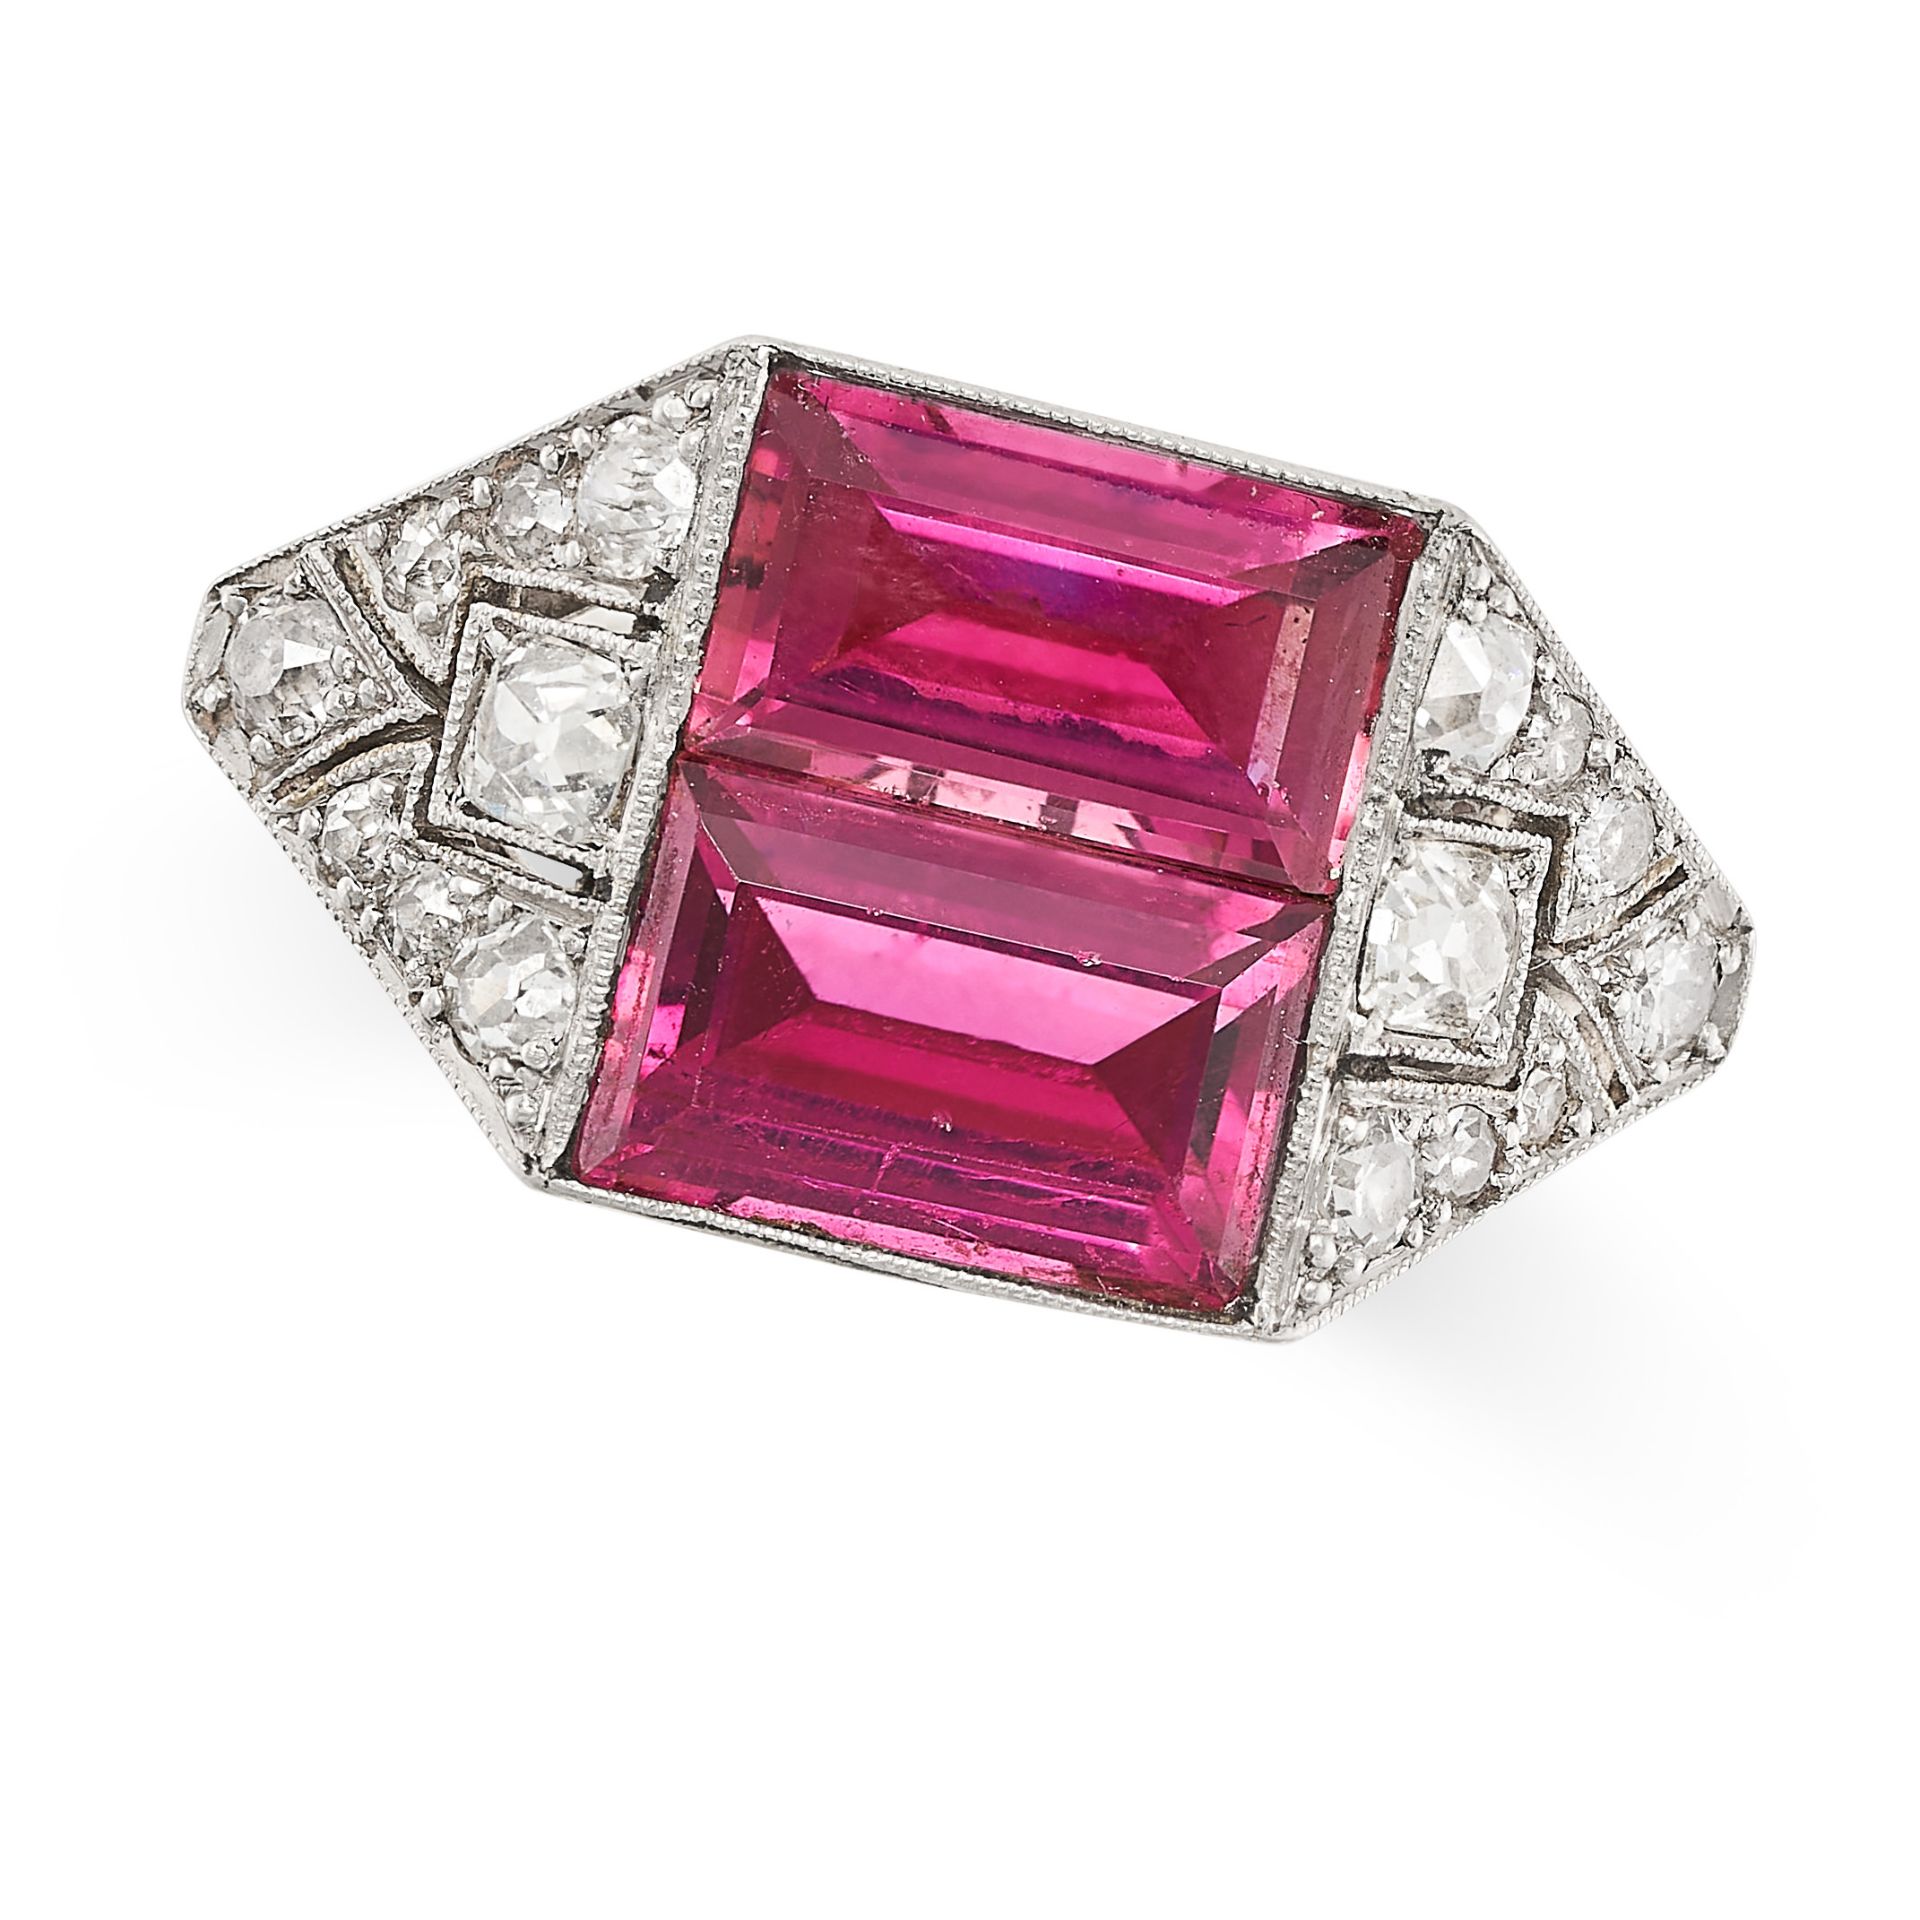 A FINE ART DECO PINK TOURMALINE AND DIAMOND RING in 18ct white gold, set with two rectangular step